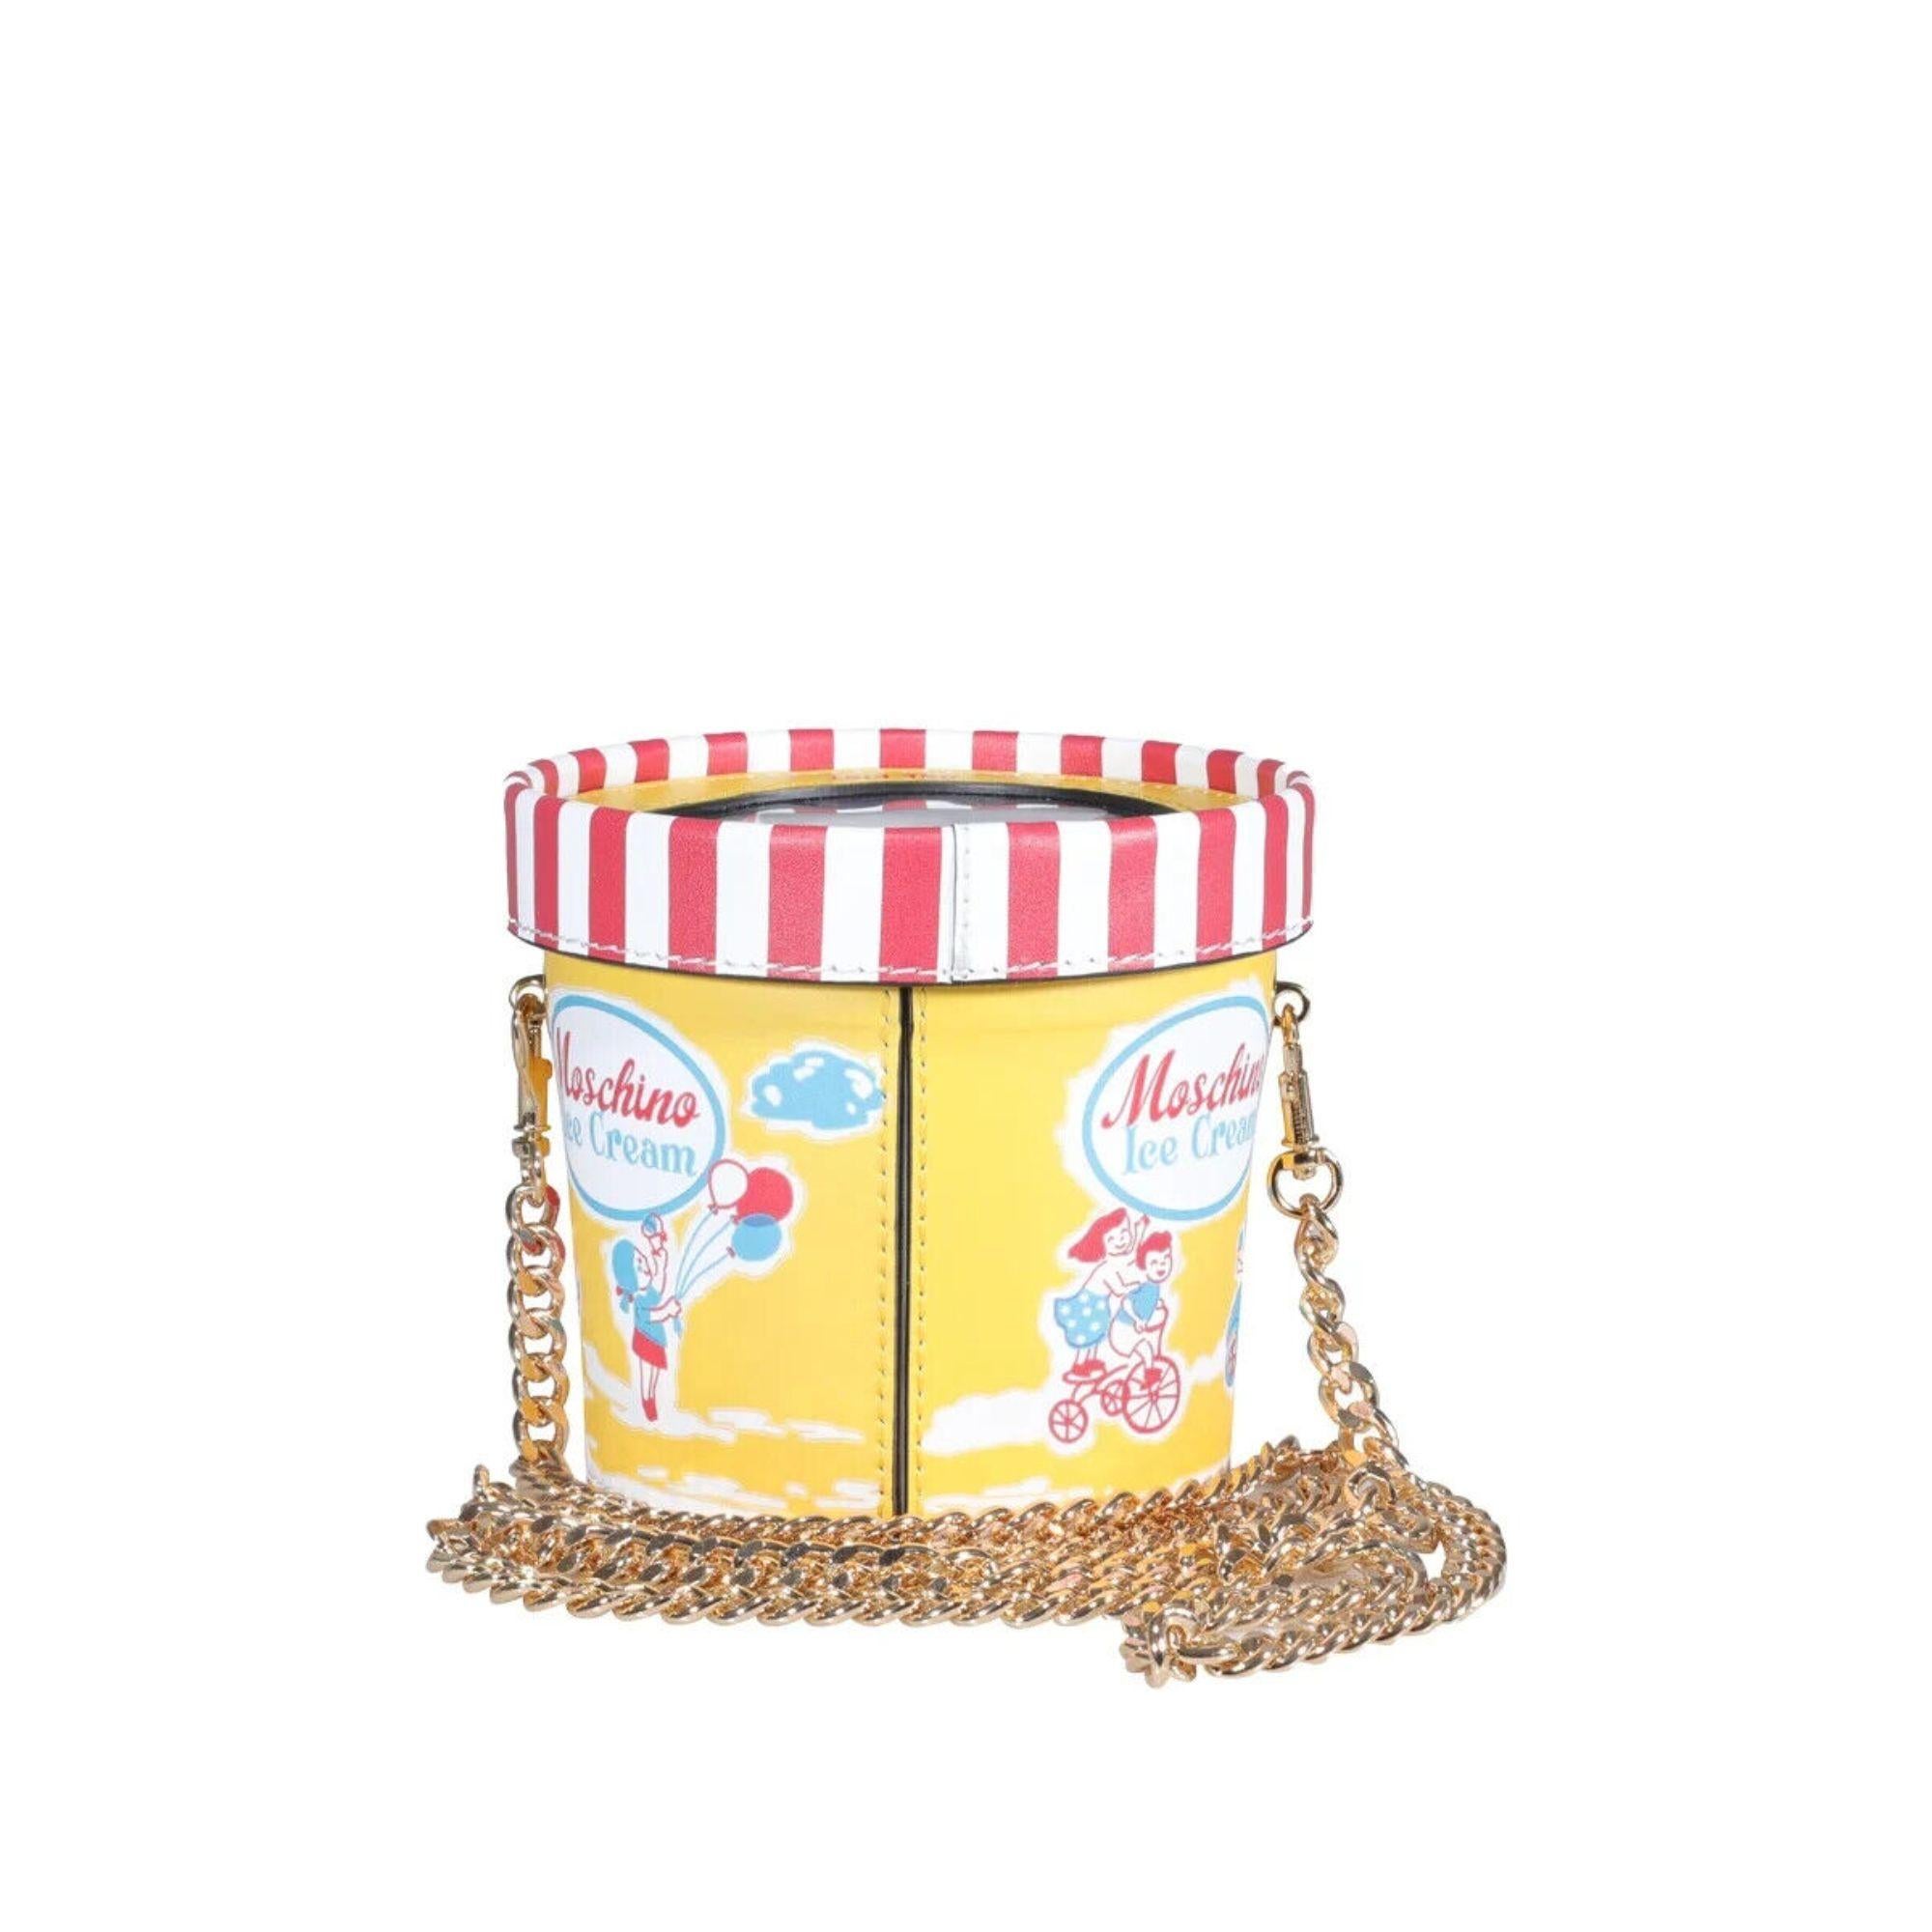 SS22 Moschino Couture Jeremy Scott BananaSplit IceCream Pint Leather ShoulderBag

Additional Information:
Material: 100% VL
Color: Red, Yellow, White, and Blue
Style: Shoulder Bag
Pattern: Banana Split Ice Cream Pint print
Dimensions: 5